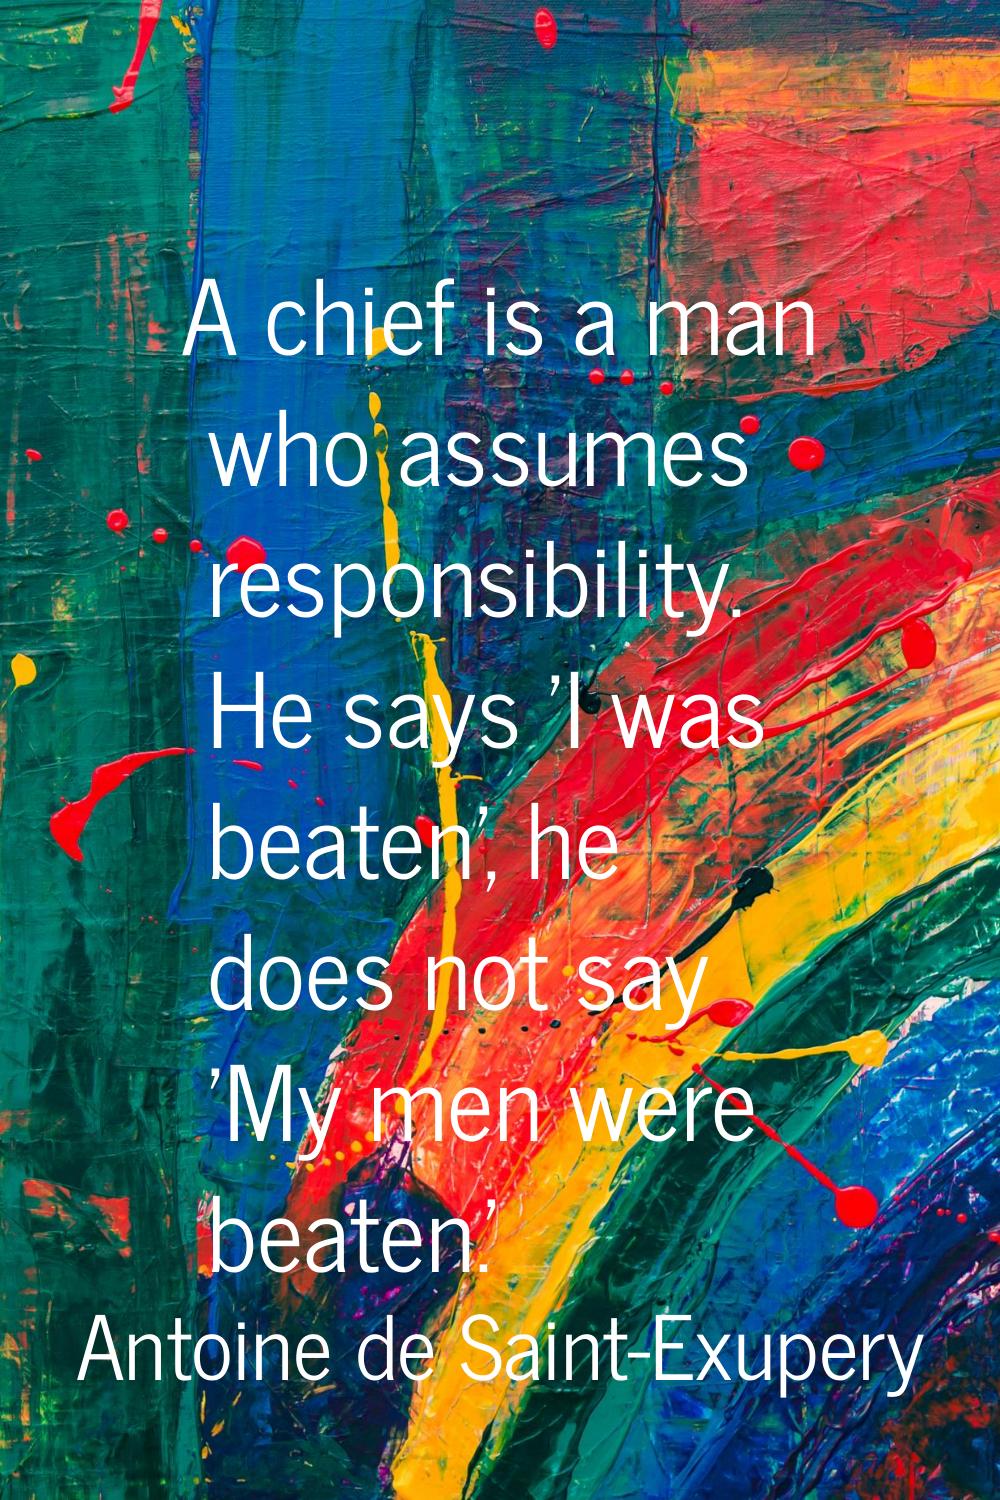 A chief is a man who assumes responsibility. He says 'I was beaten', he does not say 'My men were b